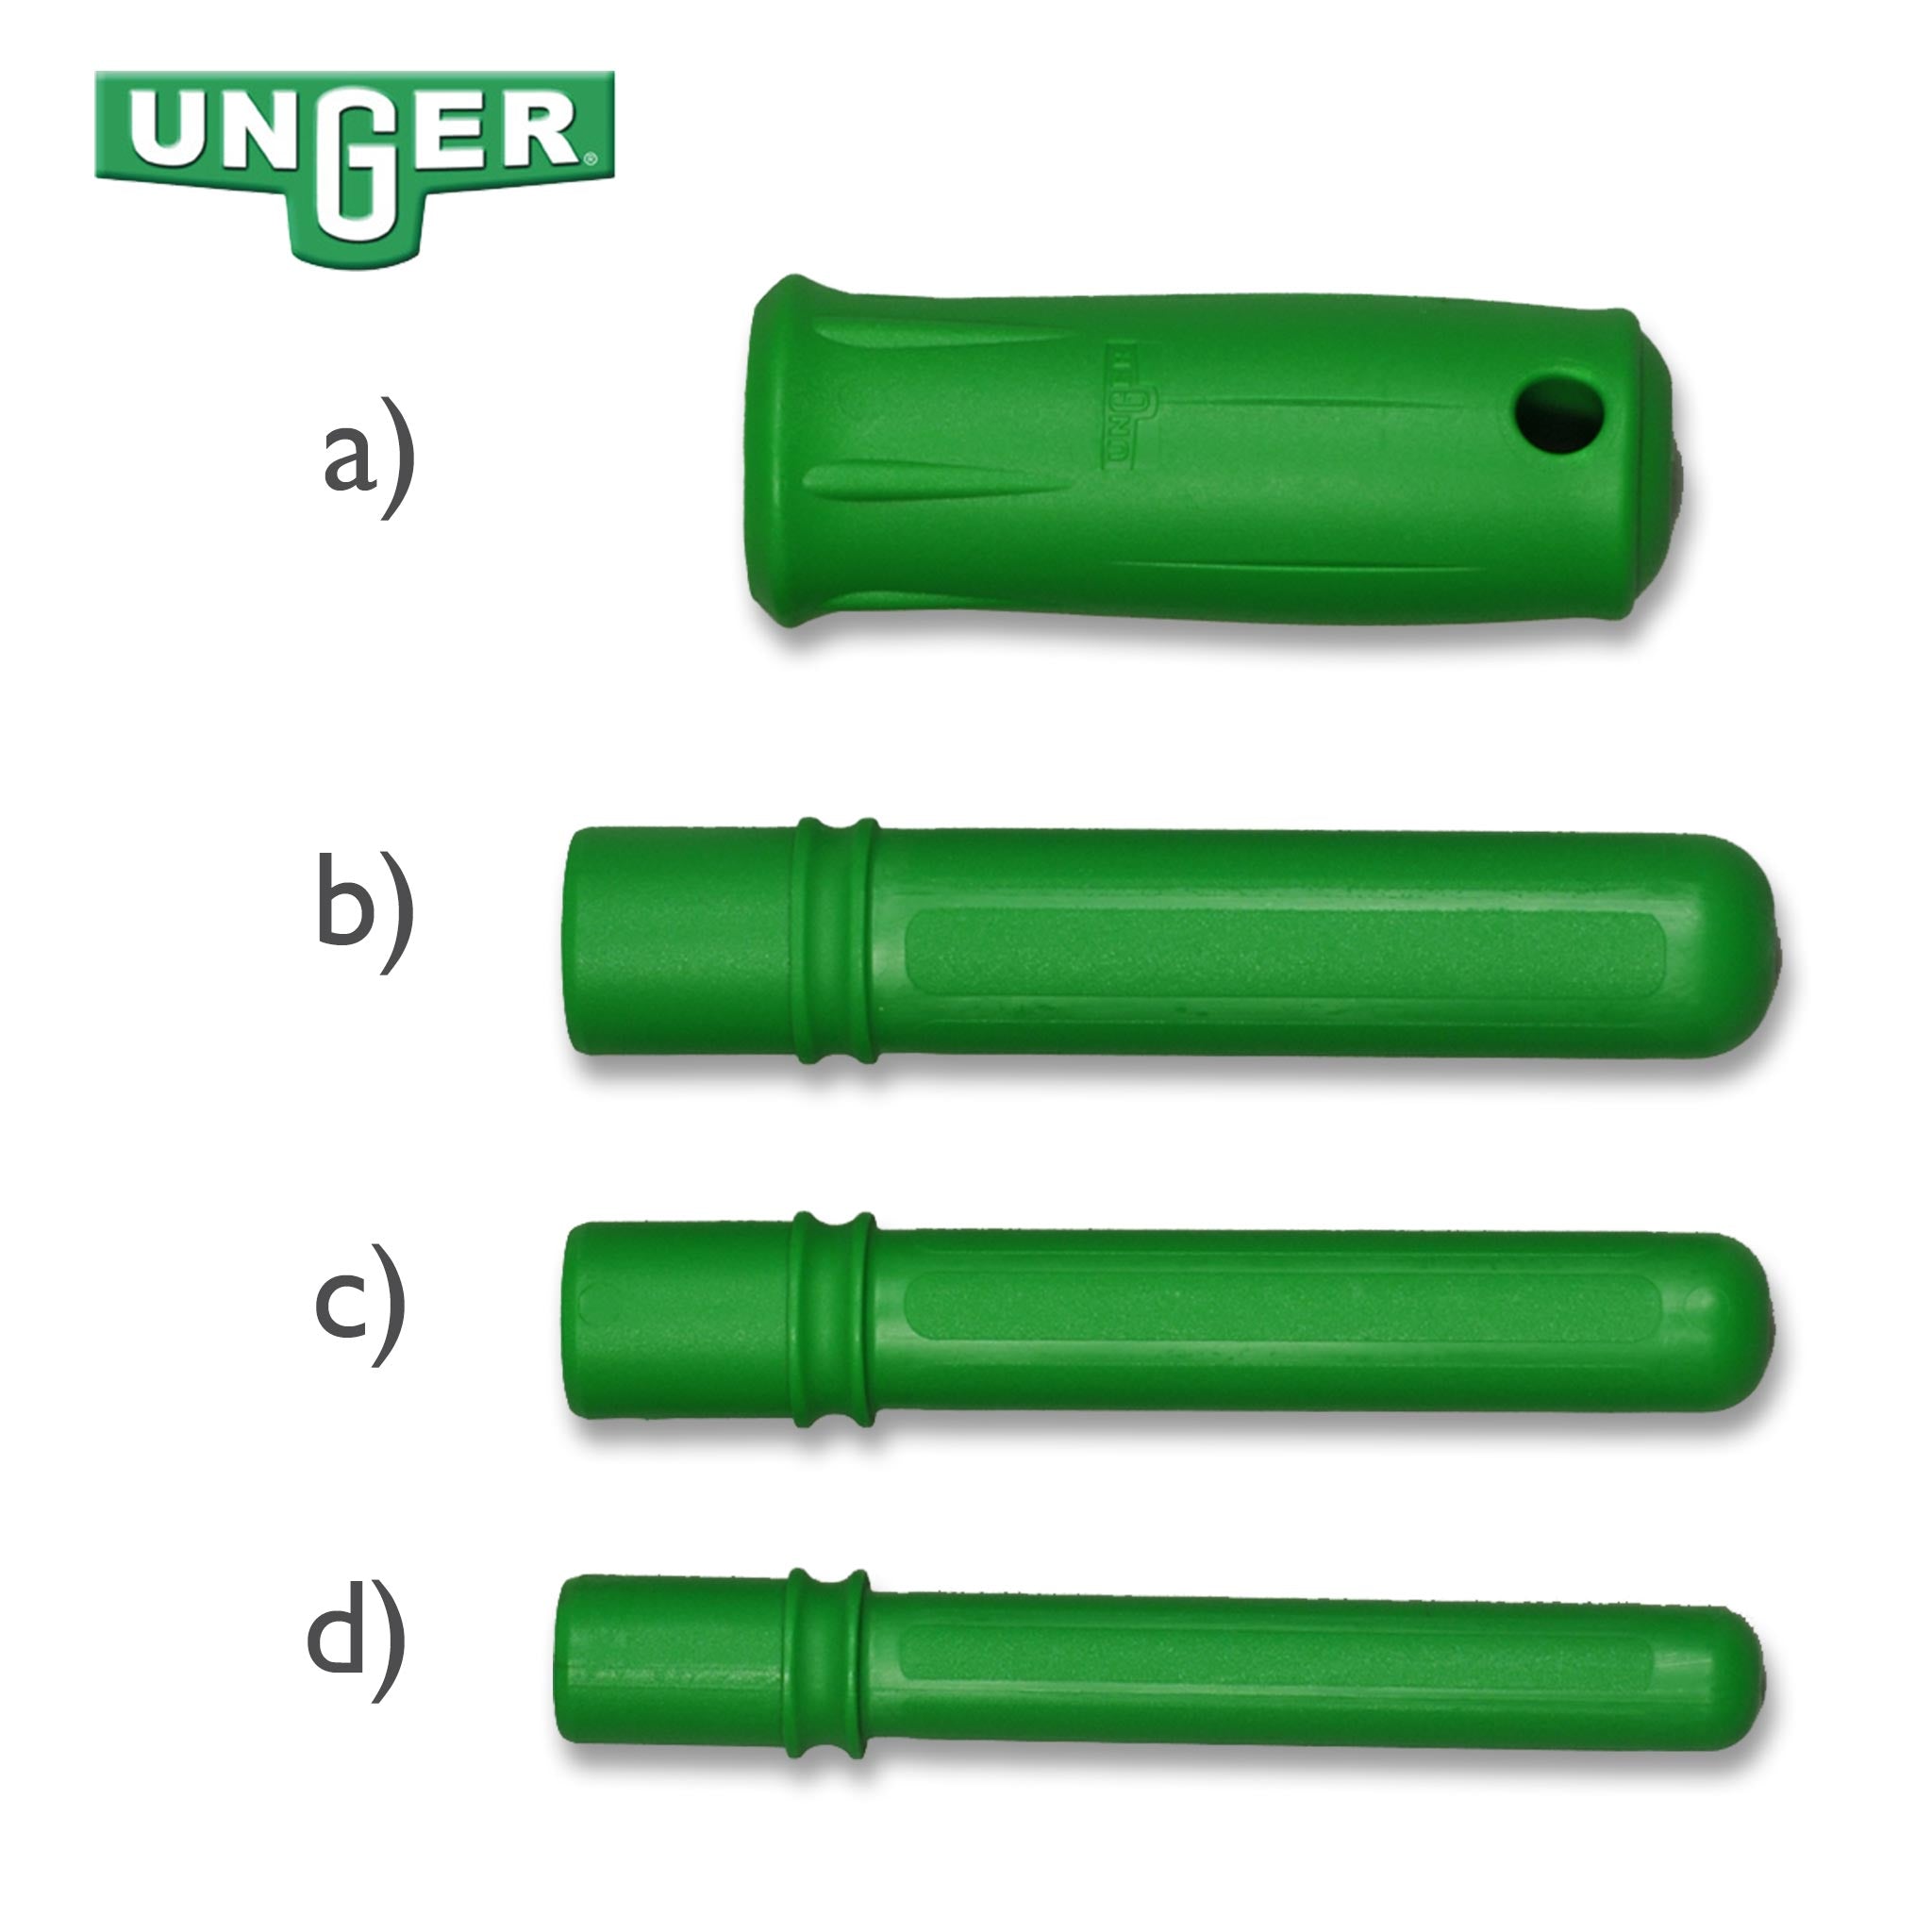 Unger Teleplus Plugs and Grips